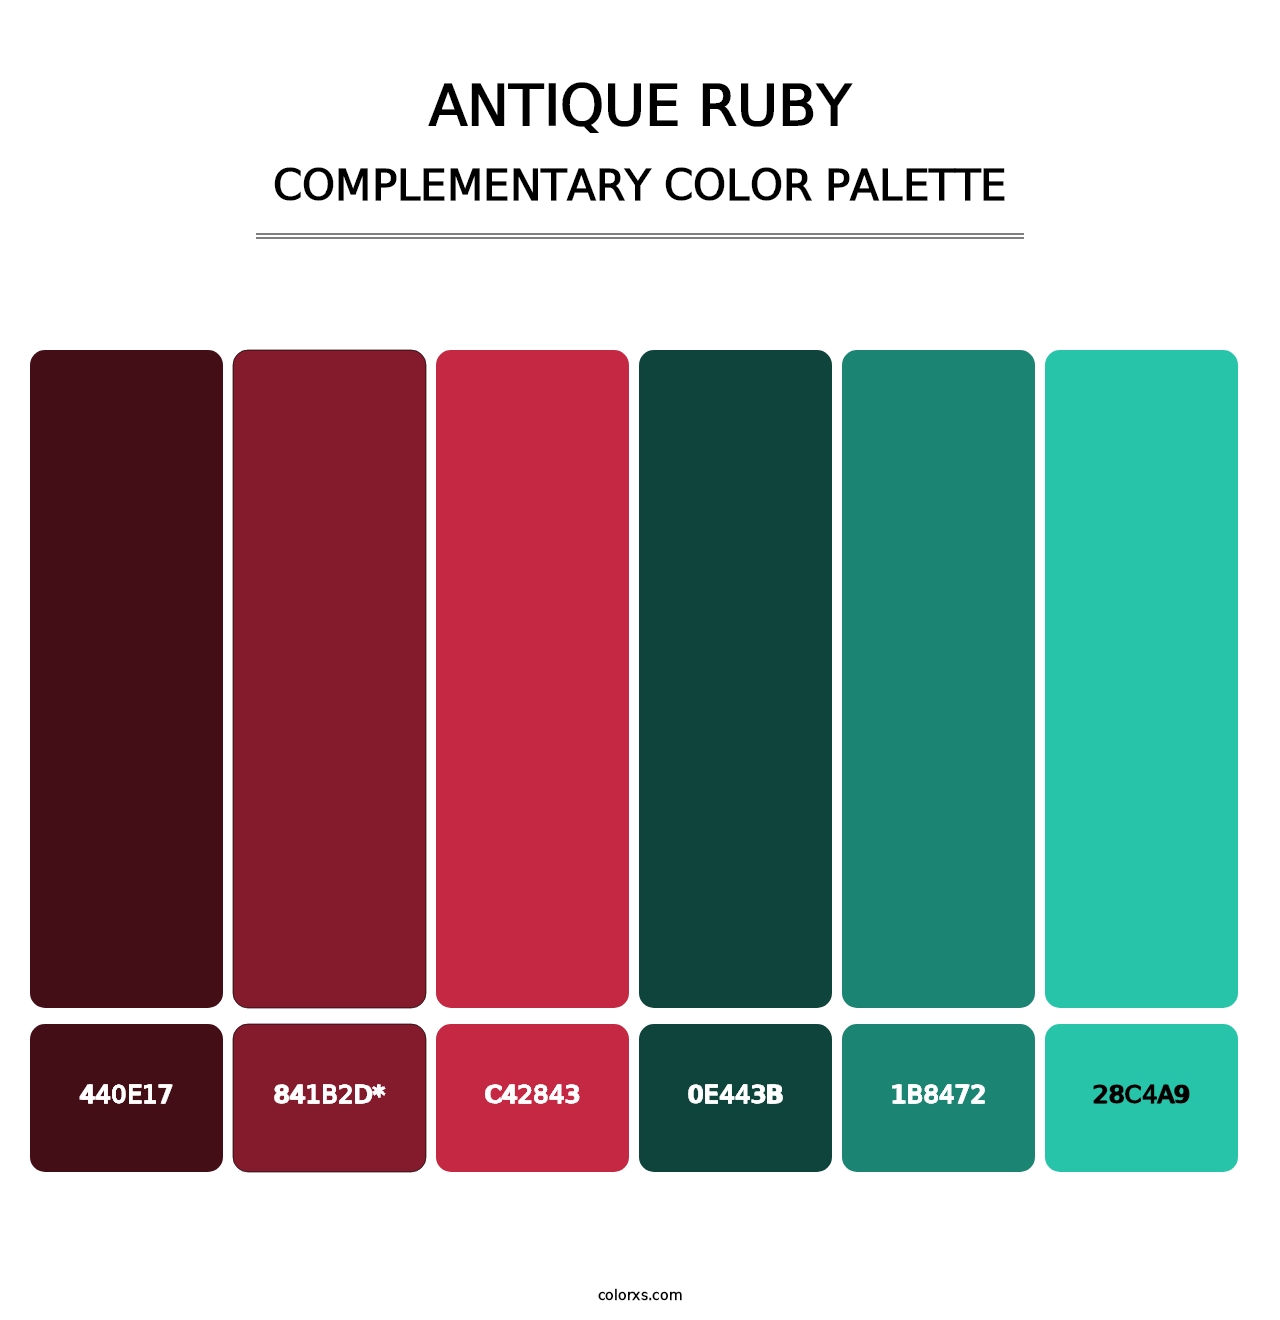 Antique Ruby - Complementary Color Palette